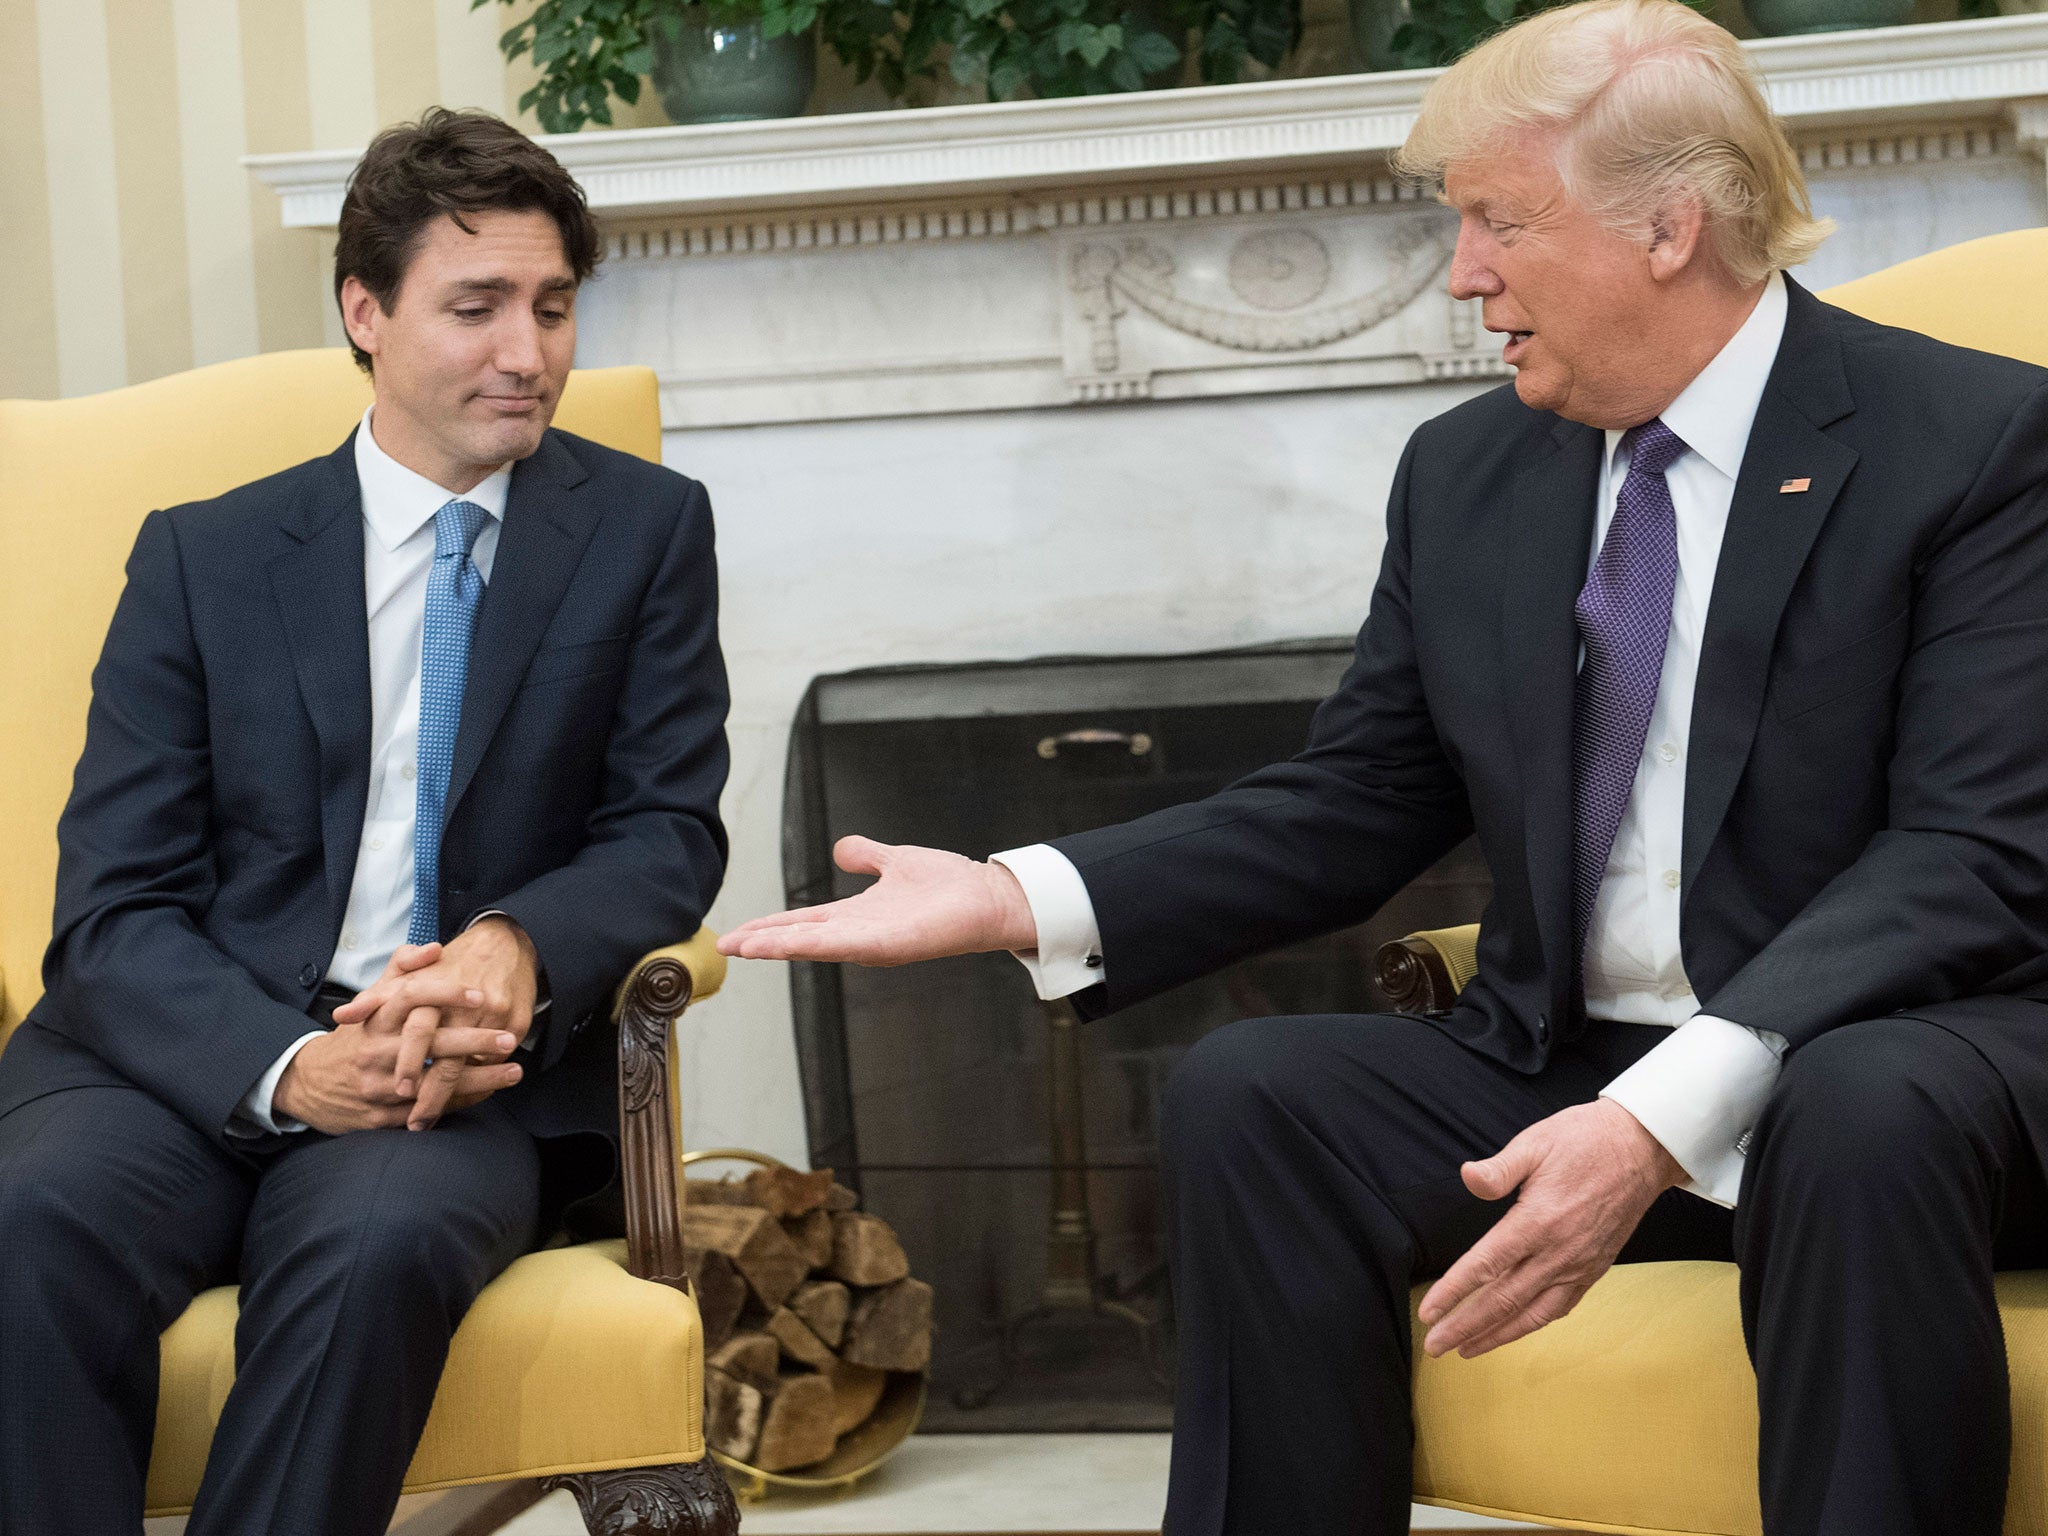 Donald Trump and Canadian Prime Minister Justin Trudeau during a meeting at the White House on 13 February 2017